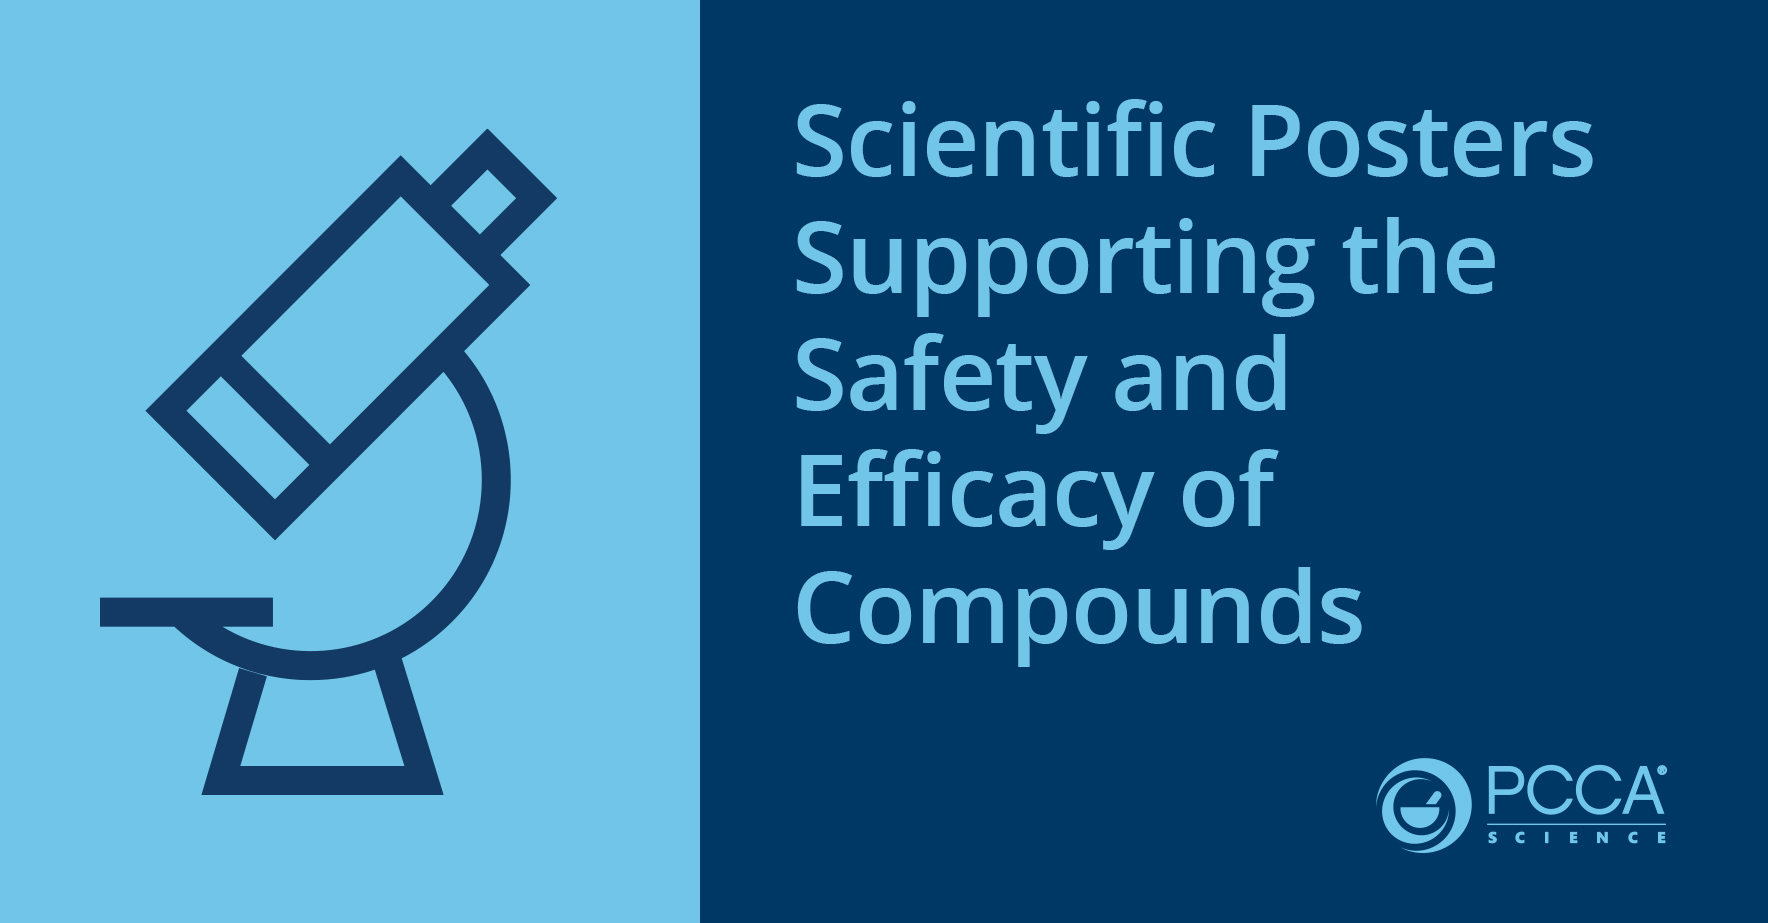 scientific_posters_supporting_the_safety_and_efficacy_of_compounds.jpg